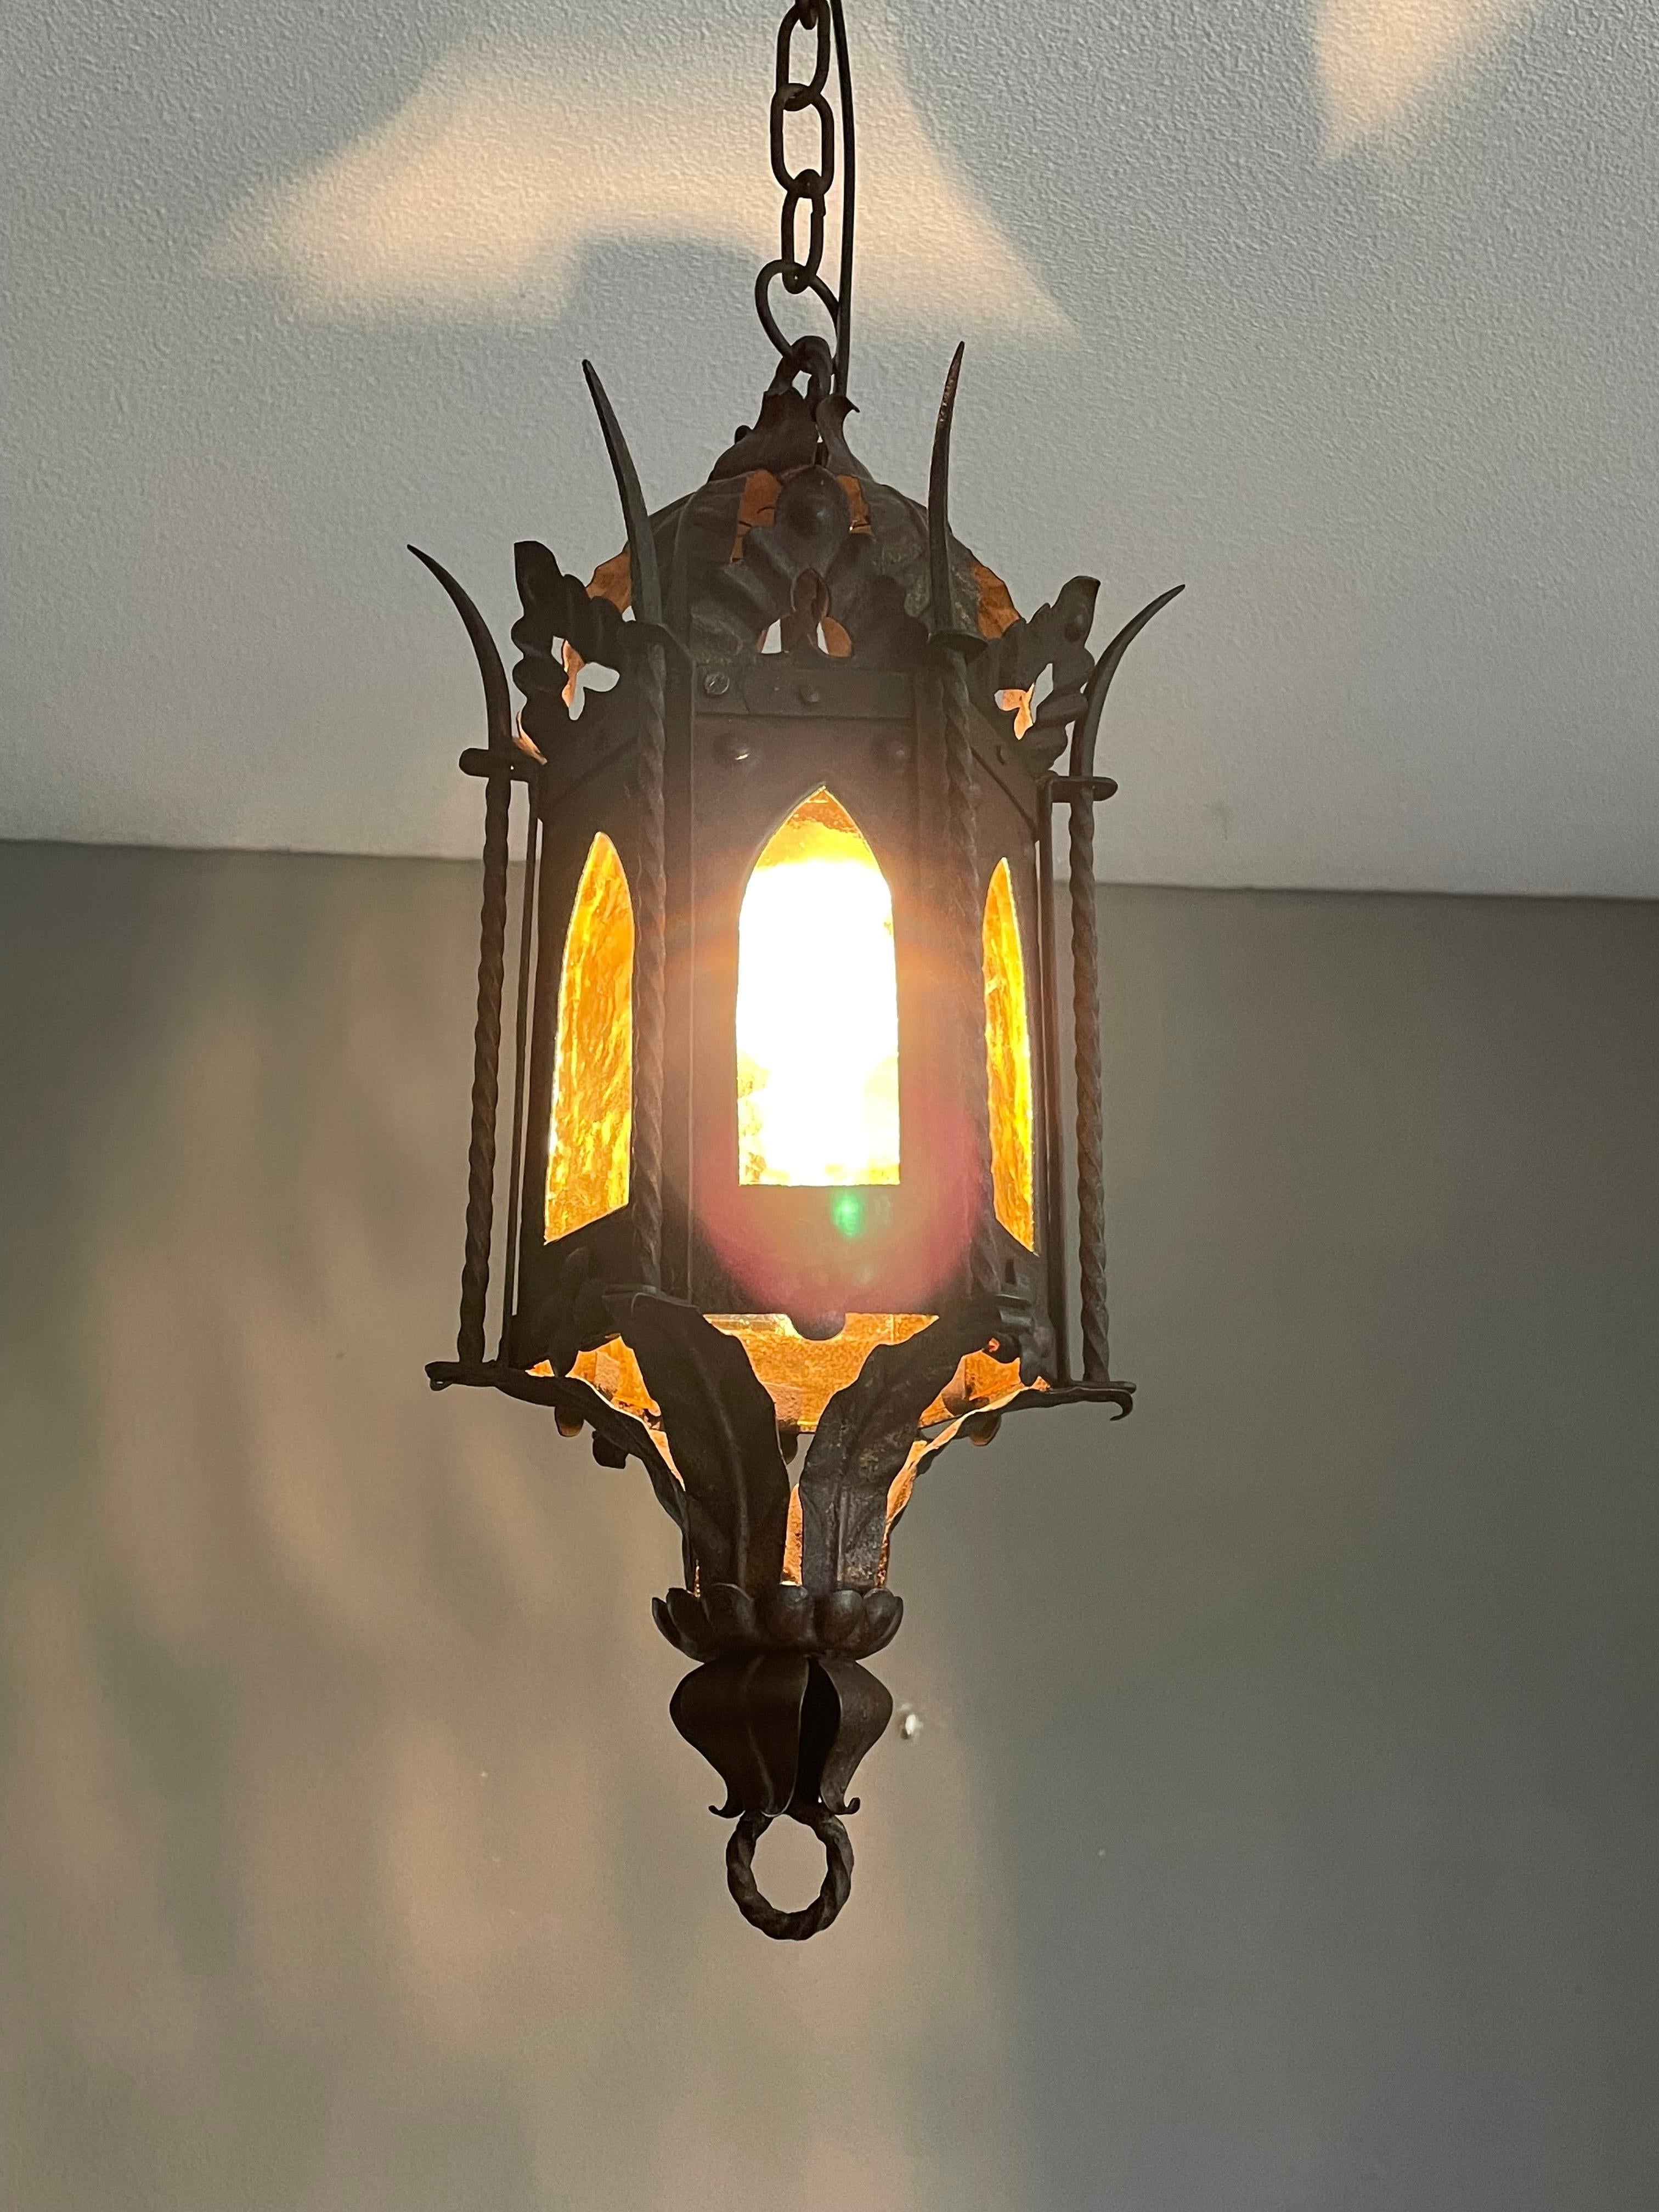 All handcrafted, hexagonal Gothic light fixture.

If you are a collector of rare and ancient looking Gothic antiques then this relatively small size and possibly one of a kind pendant could be flying your way soon. With antique light fixtures as